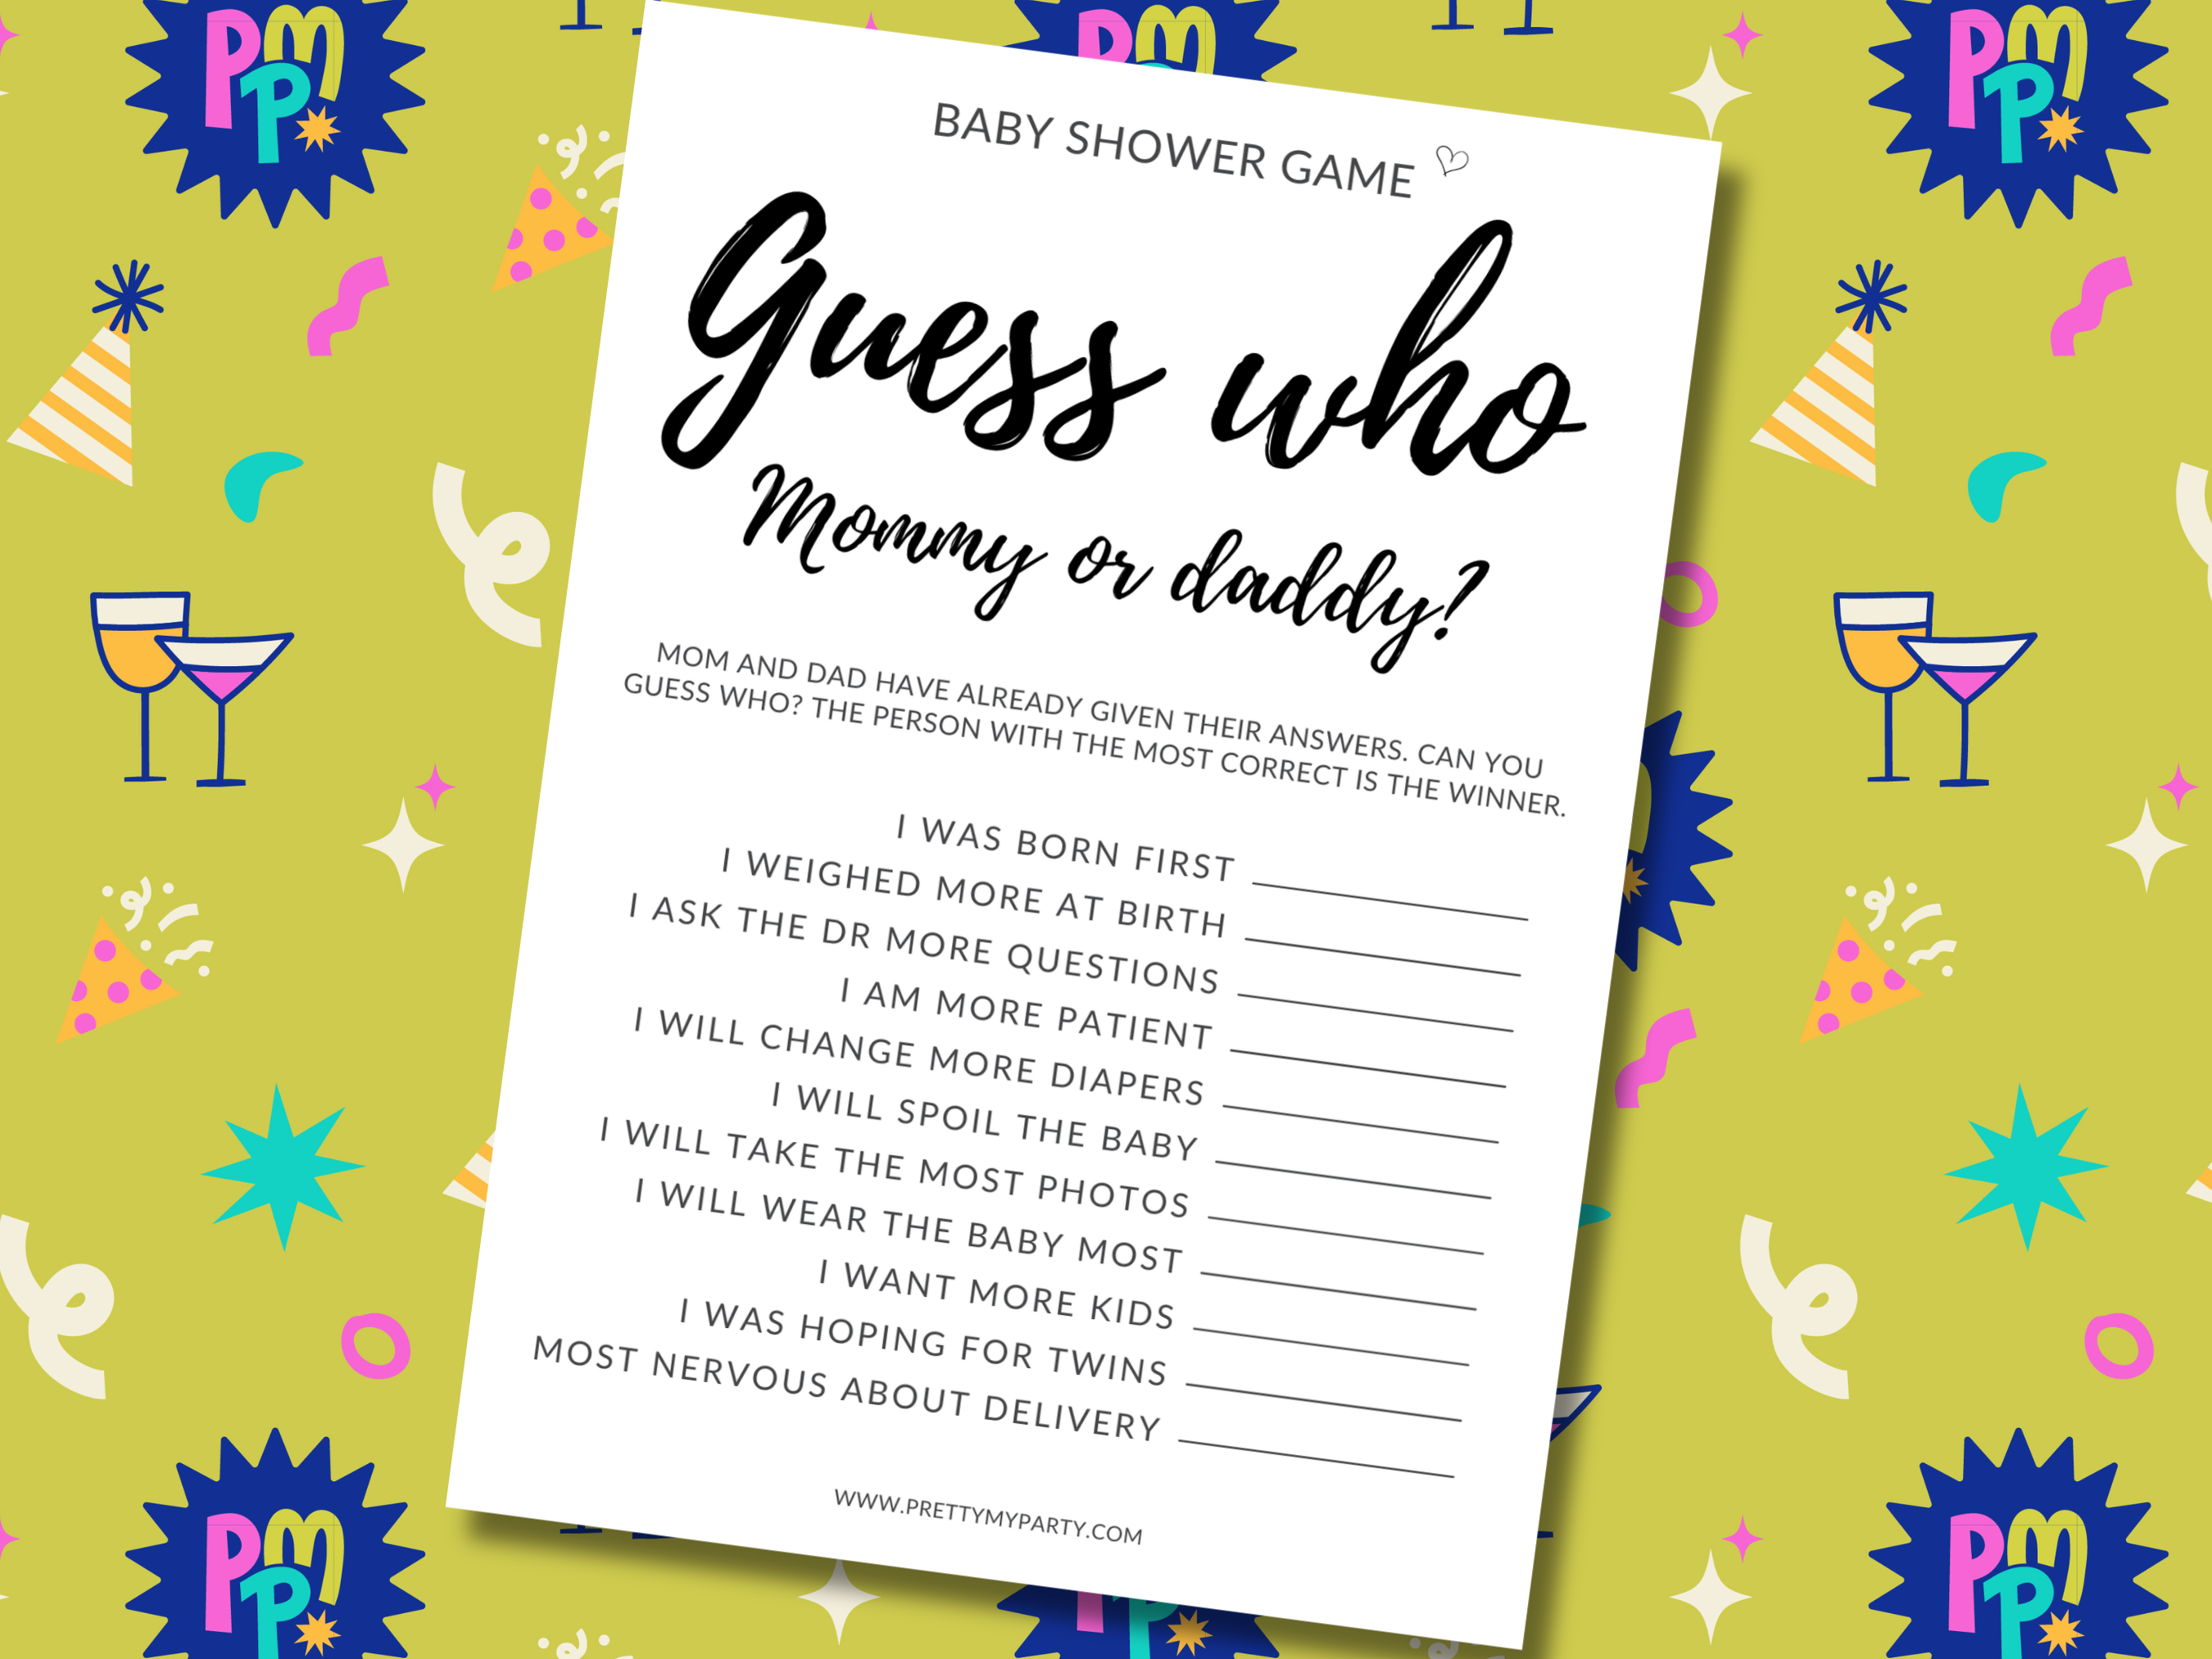 Guess Who: Mommy or Daddy? Free Printable Baby Shower Game on Pretty My Party